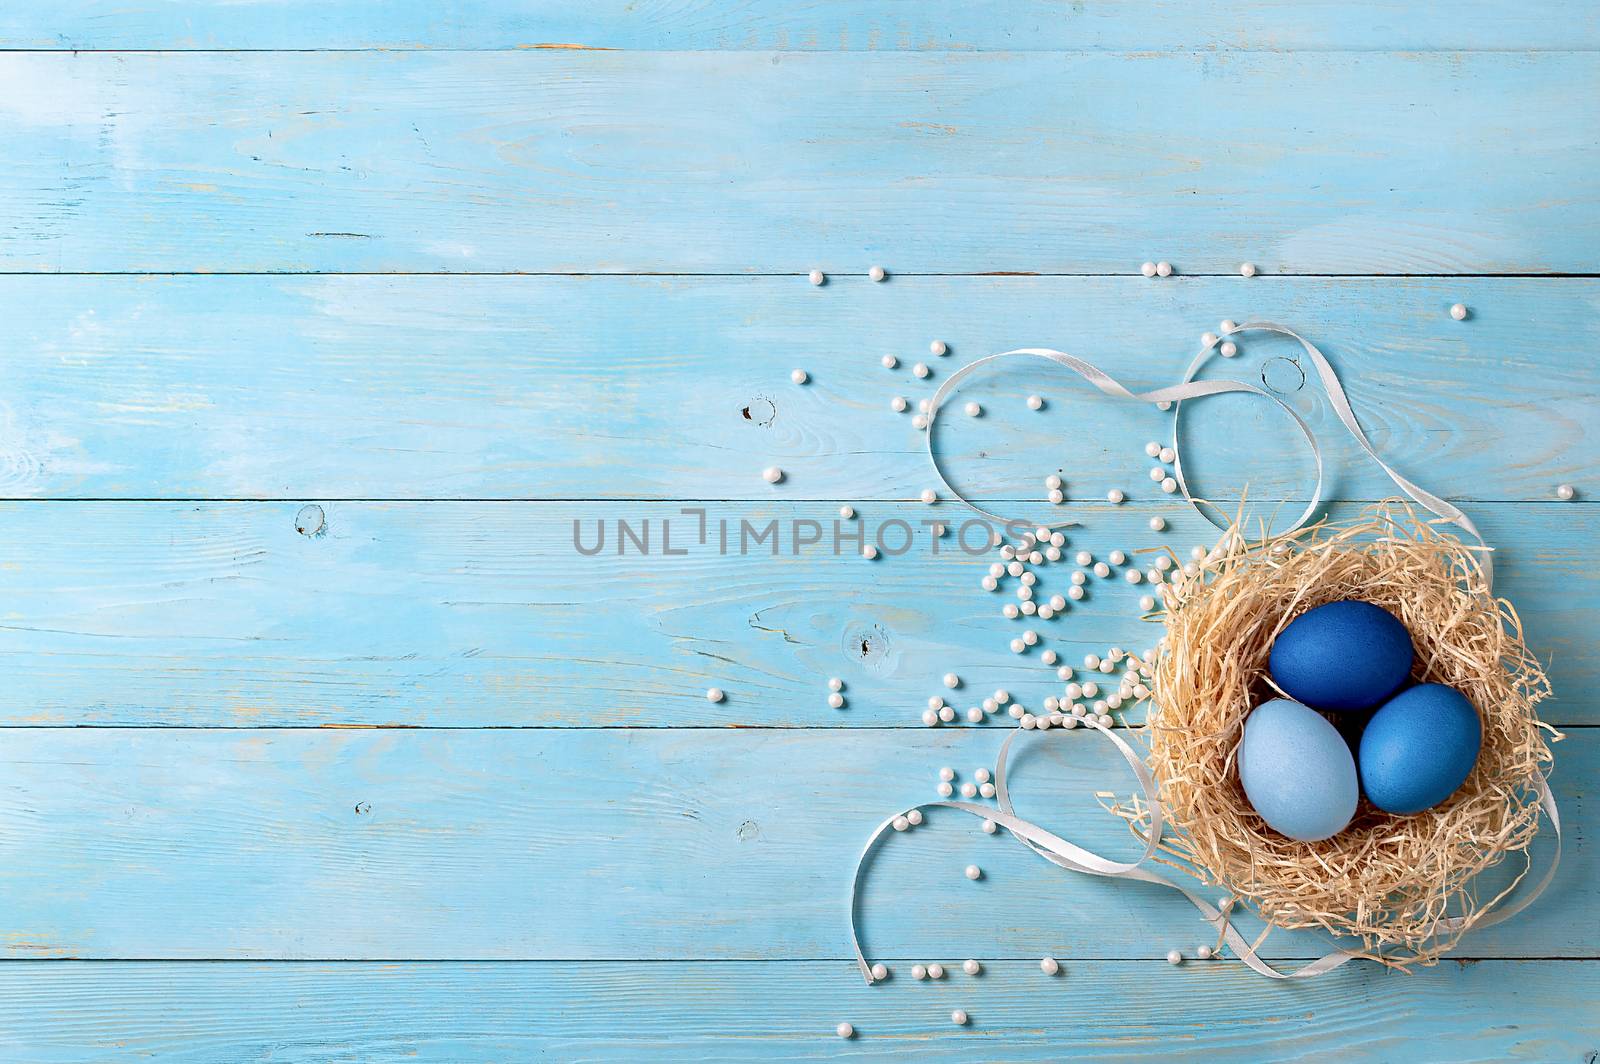 Easter concept. Ombre eggs in blue colors on blue wooden background with copy space for text. Top down view or flat lay. Classic blue colors in Easter 2020